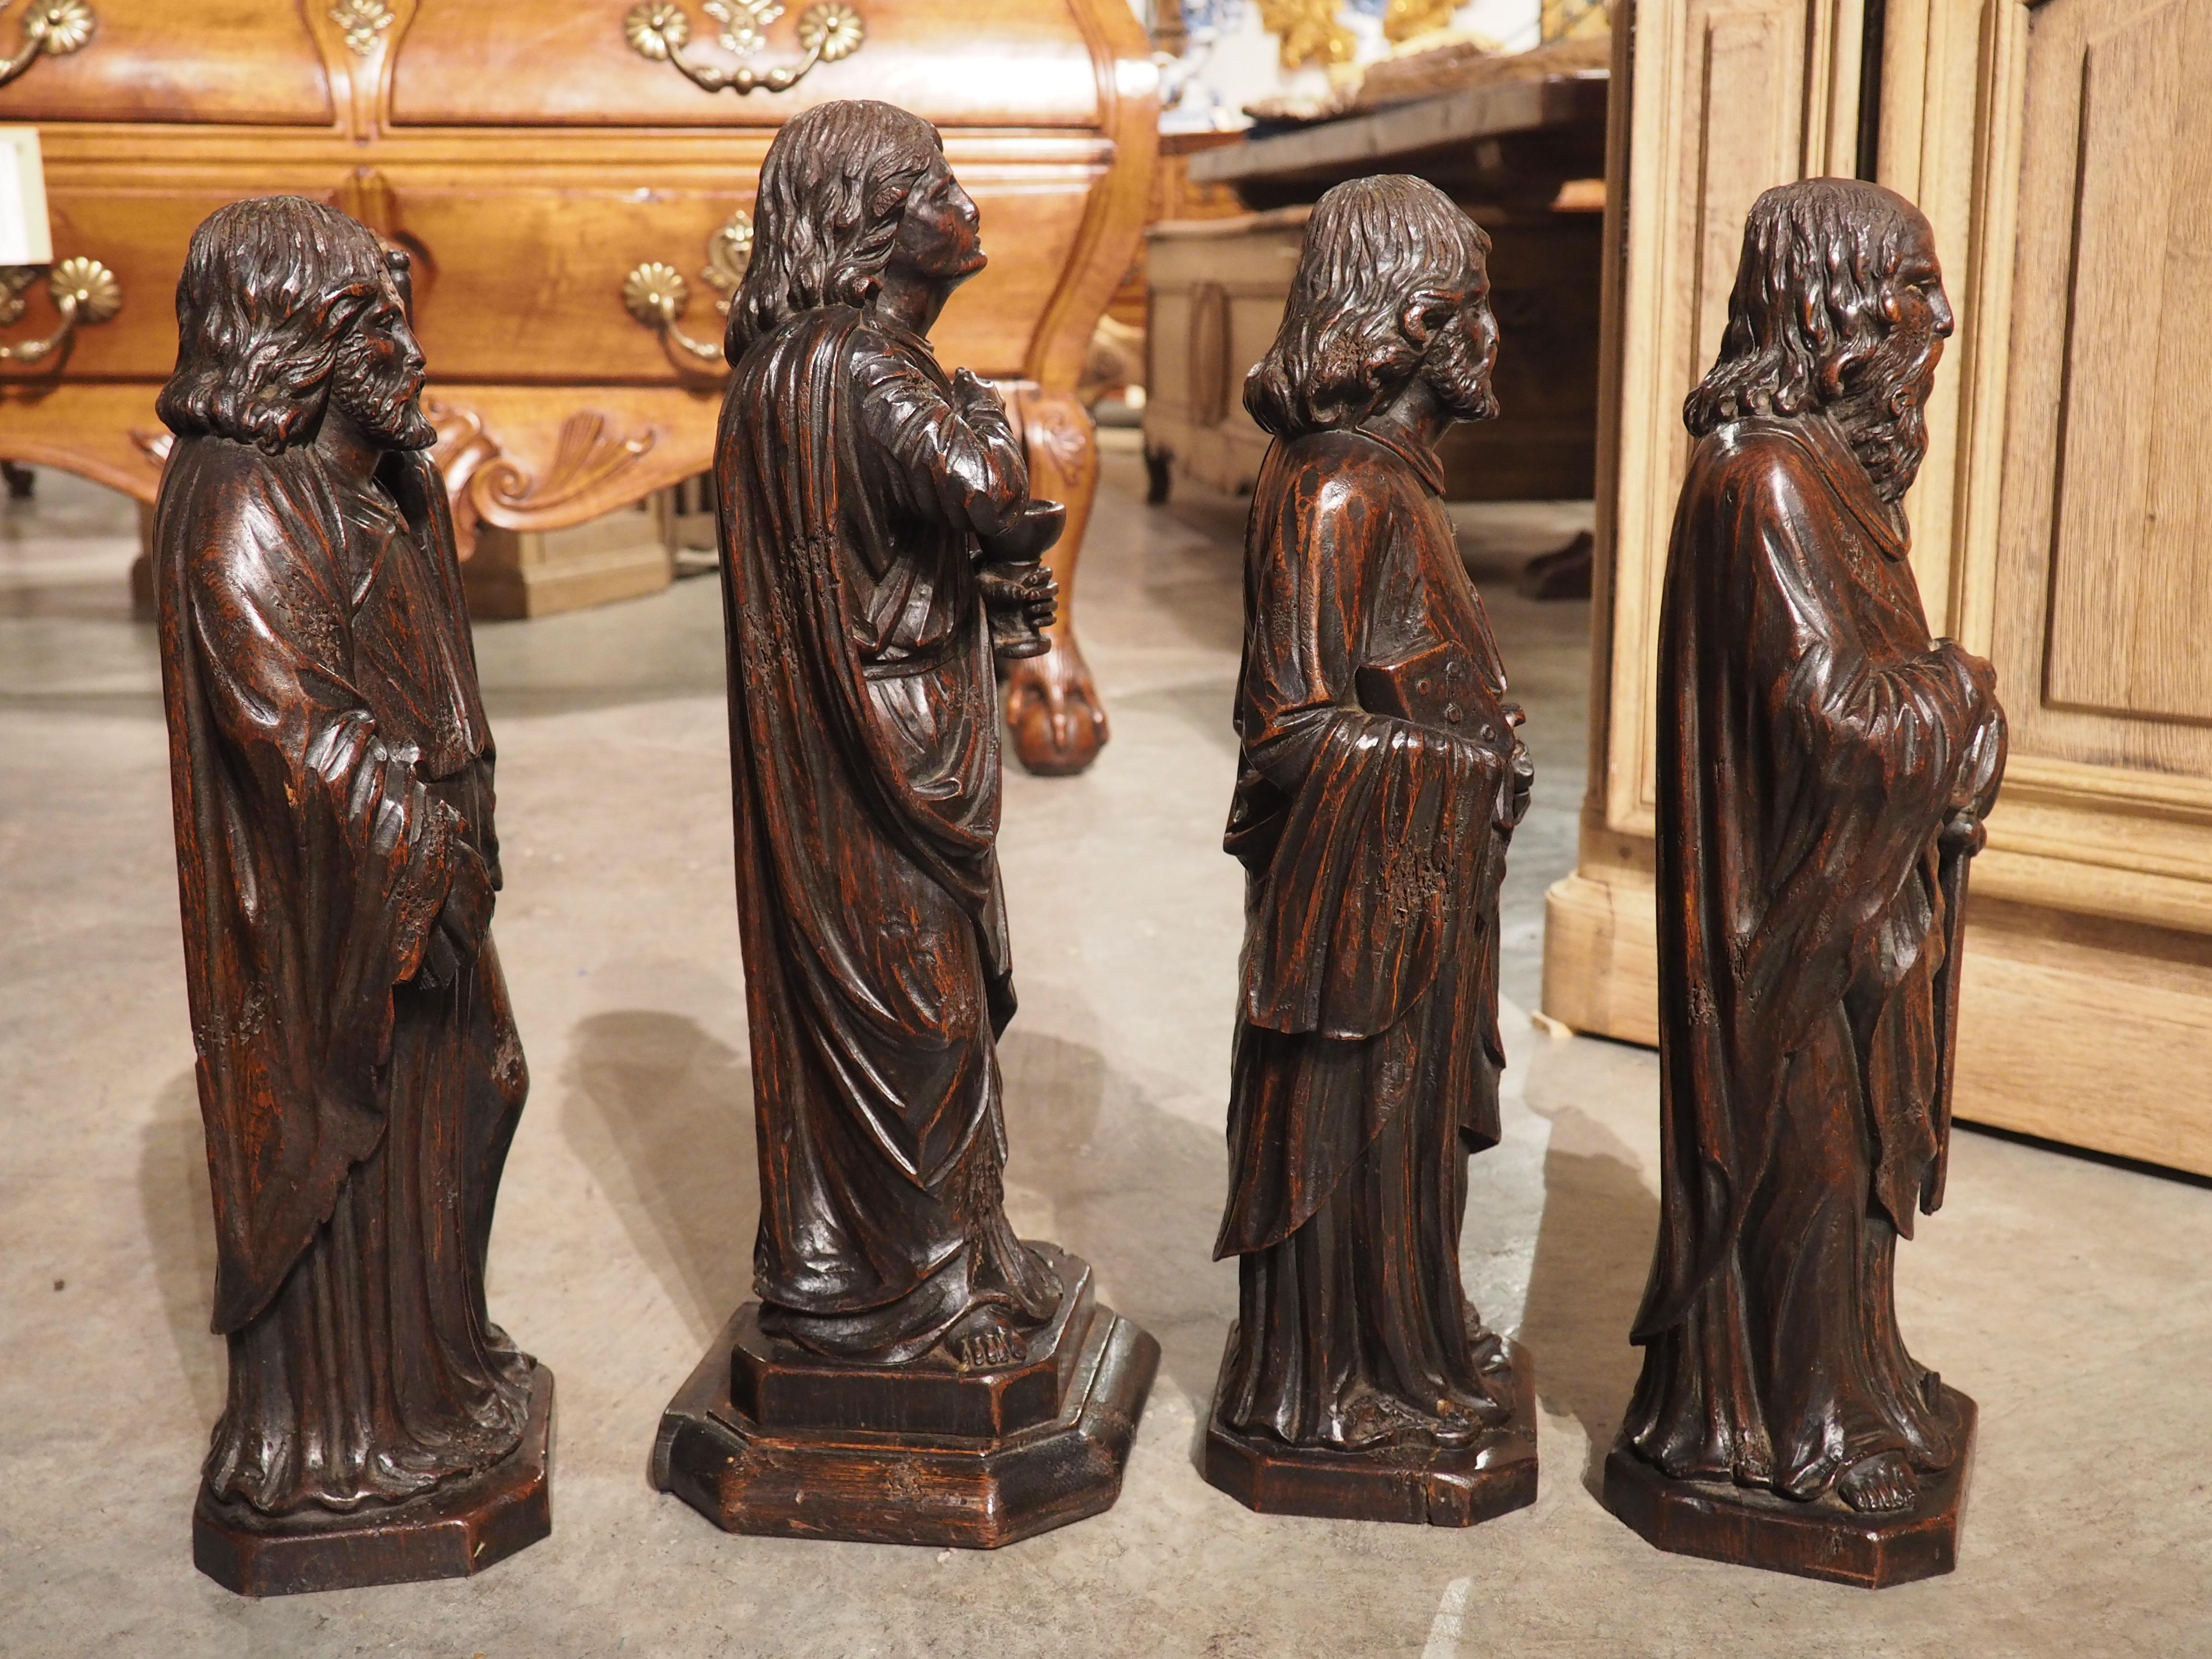 Circa 1800 Carved Oak Sculptures of the Apostles, James, John, Peter, and Paul For Sale 6